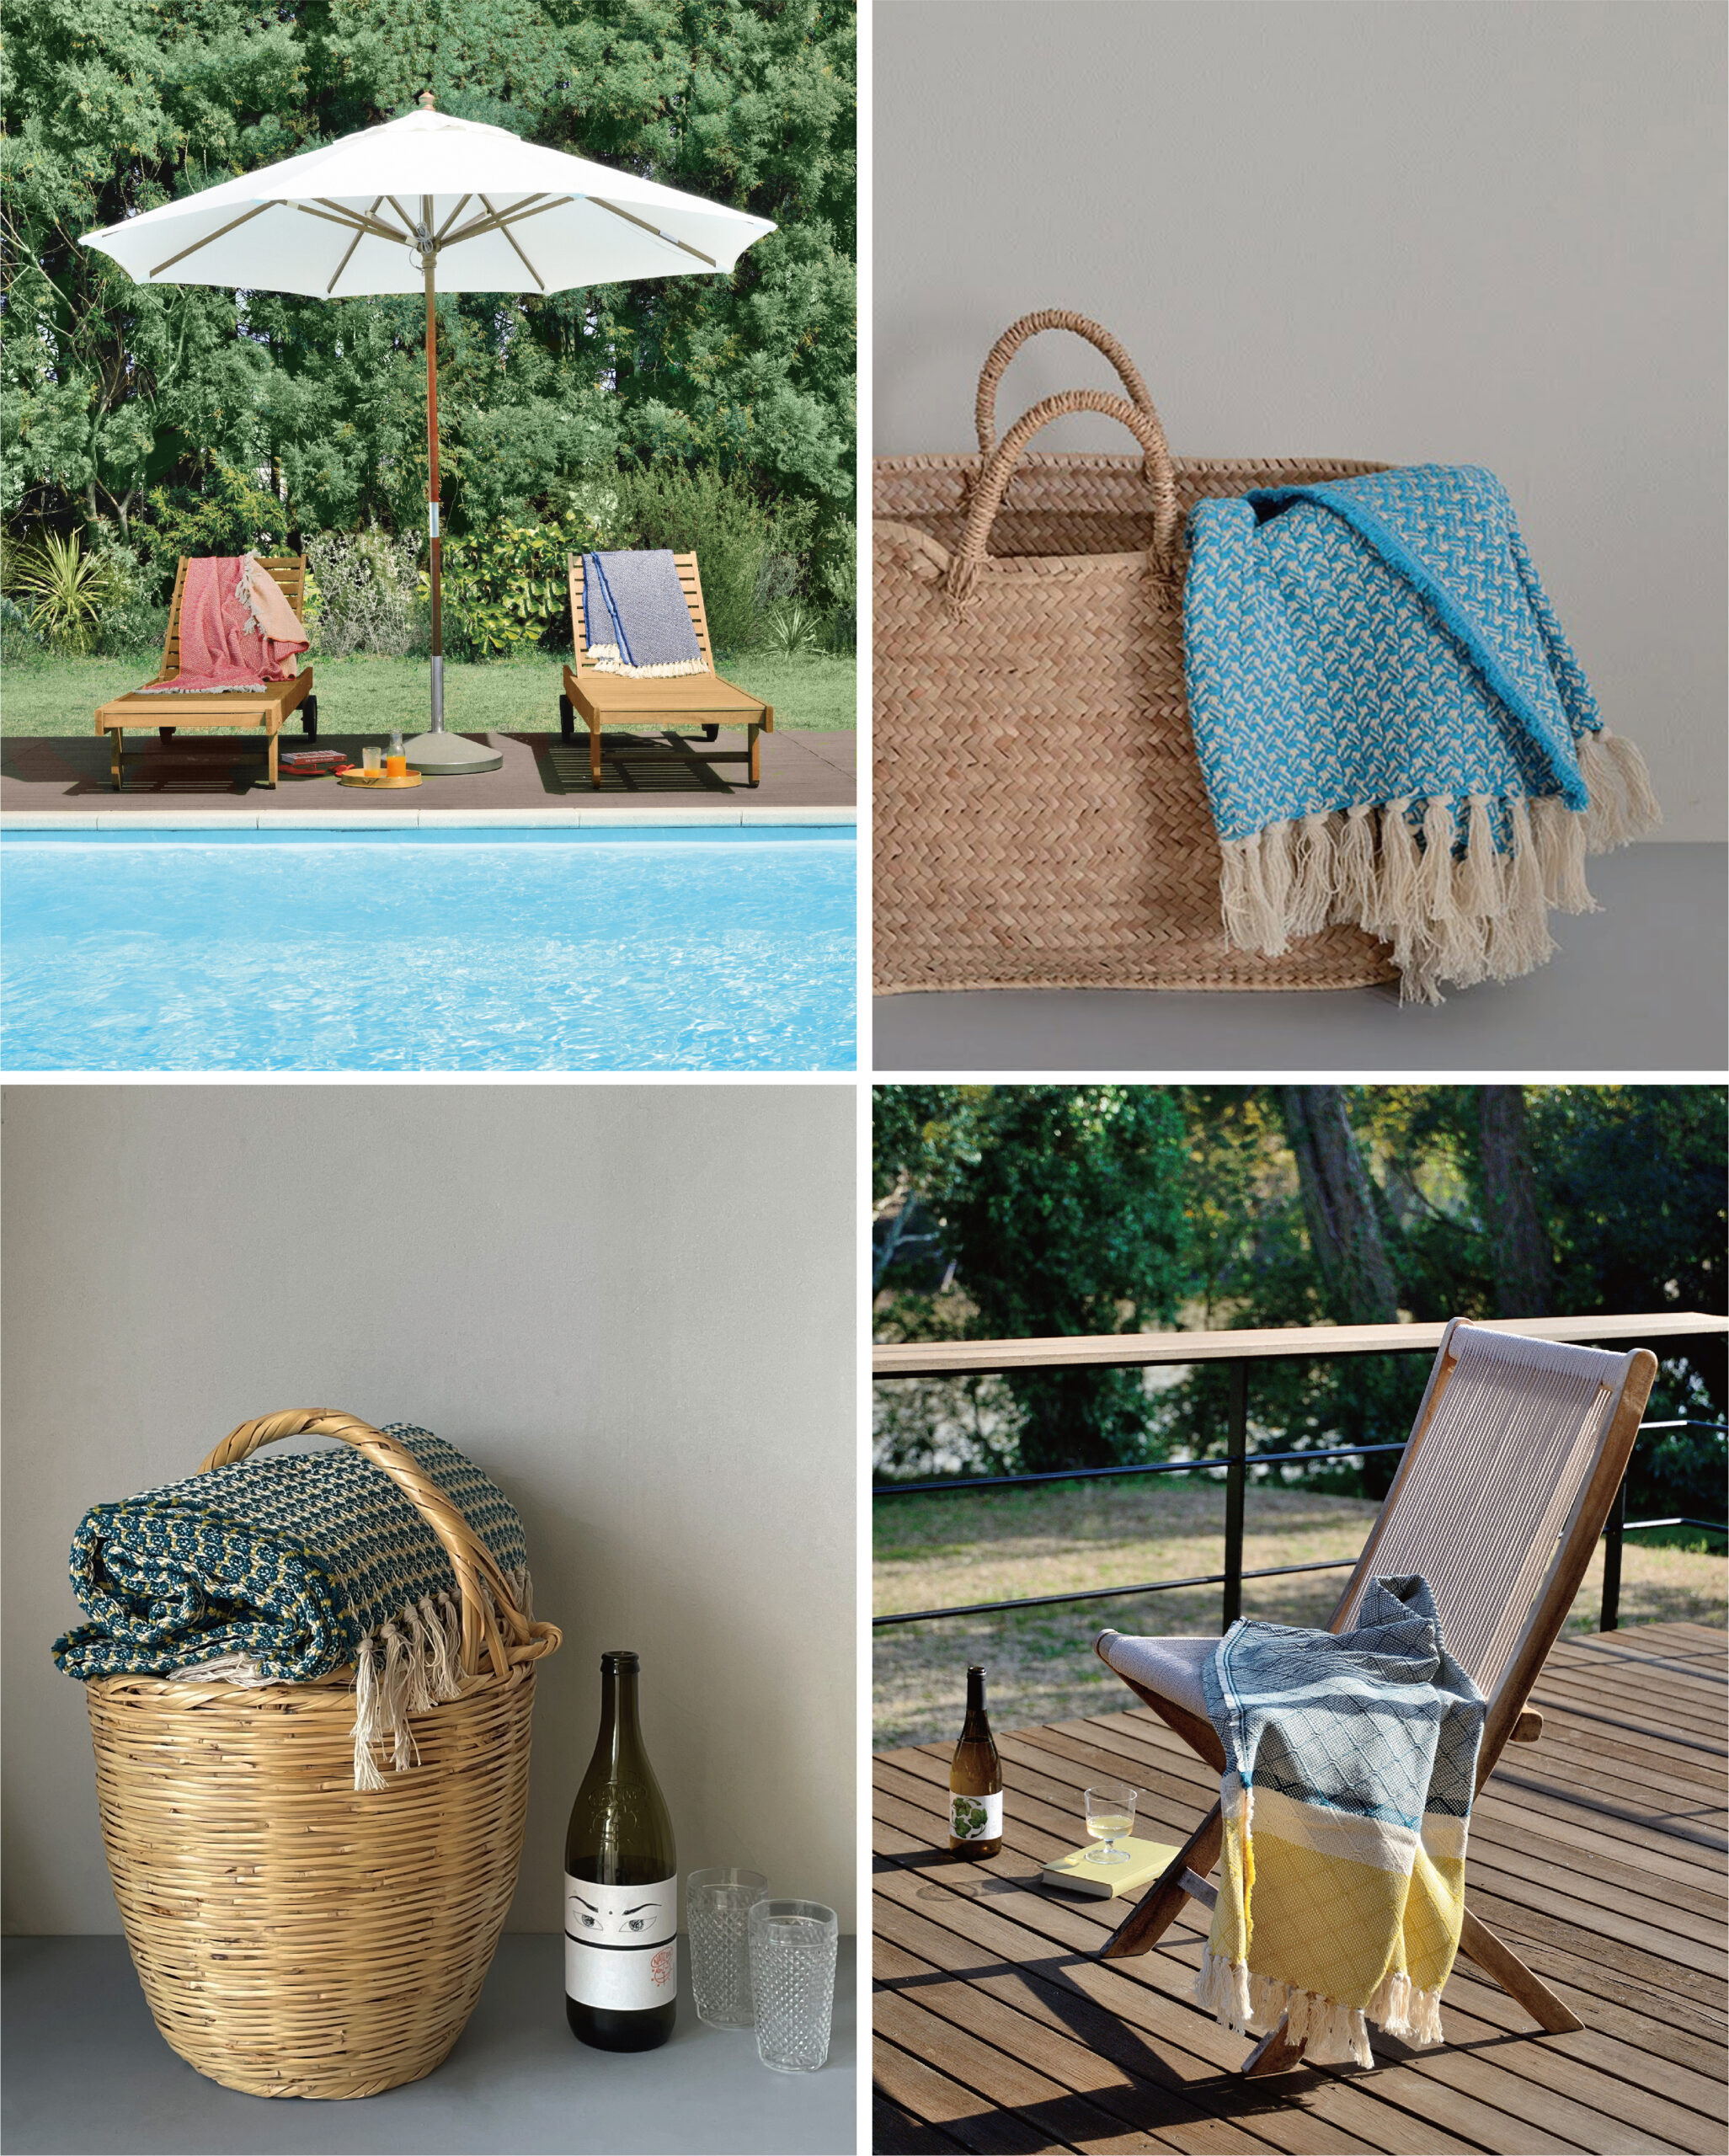 blog-seasonal-news-poolsode-chair-with-natural-blanket-and-basket-wine-glass